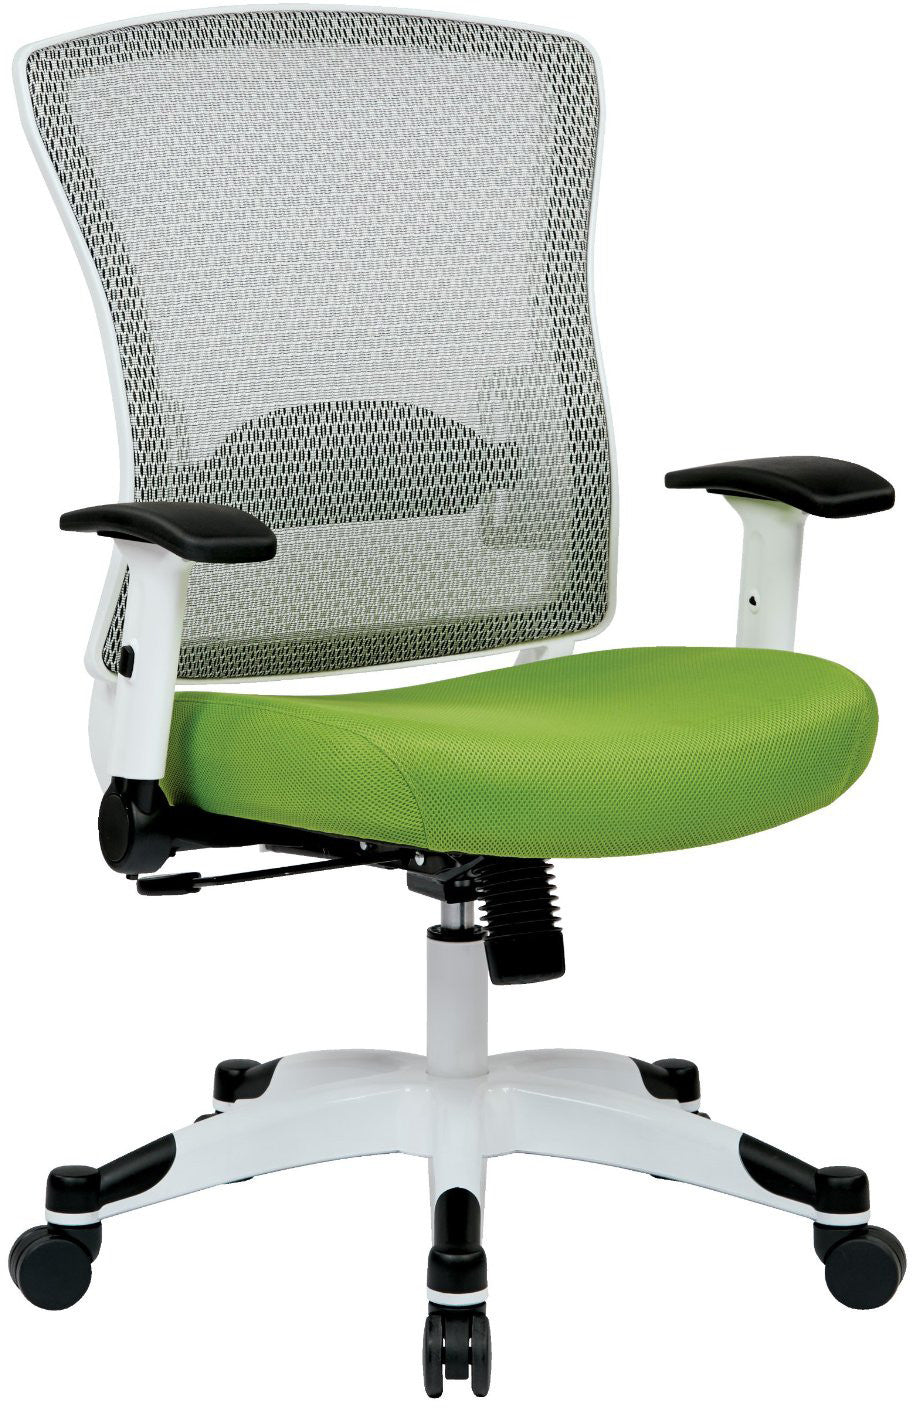 Space Seating 317w-w1c1f2w-6 White Frame Managers Chair (green)